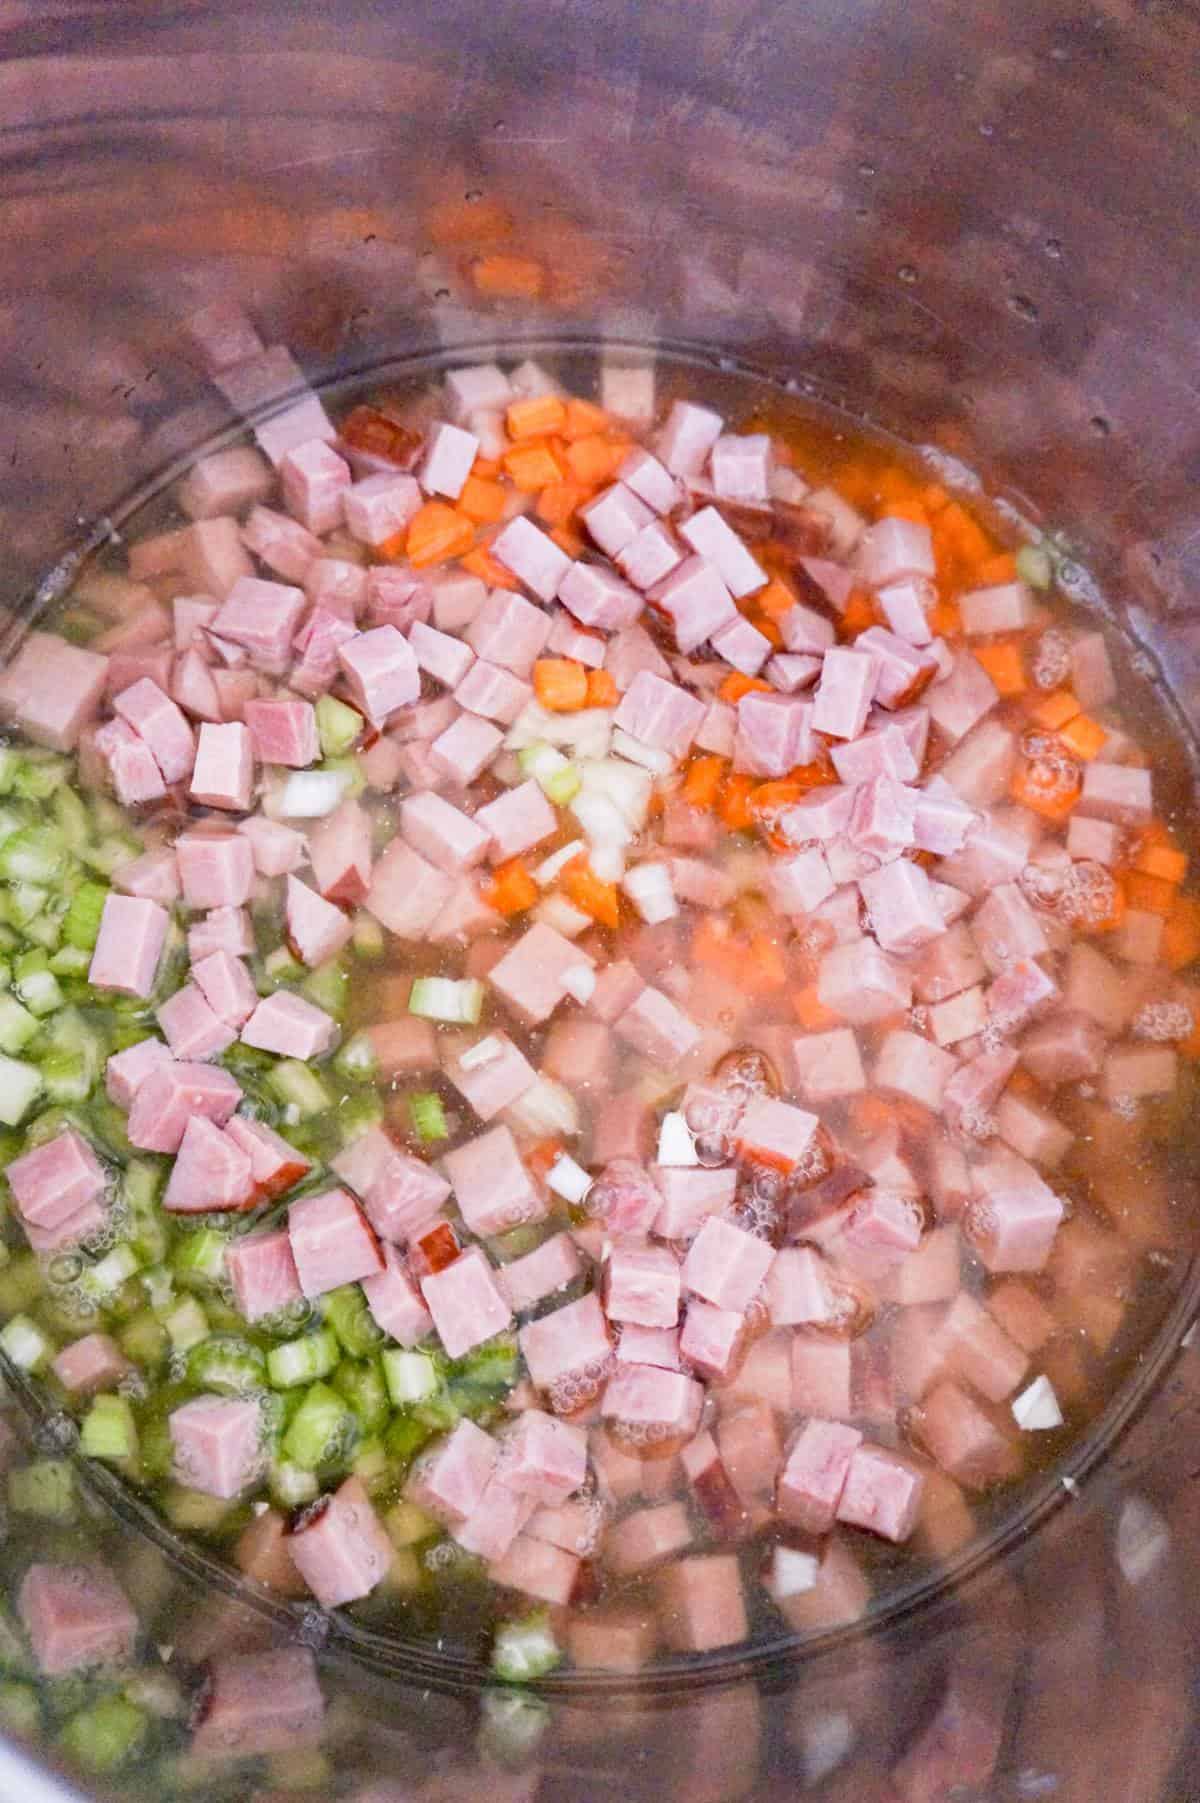 diced ham and diced vegetables in broth in an Instant Pot